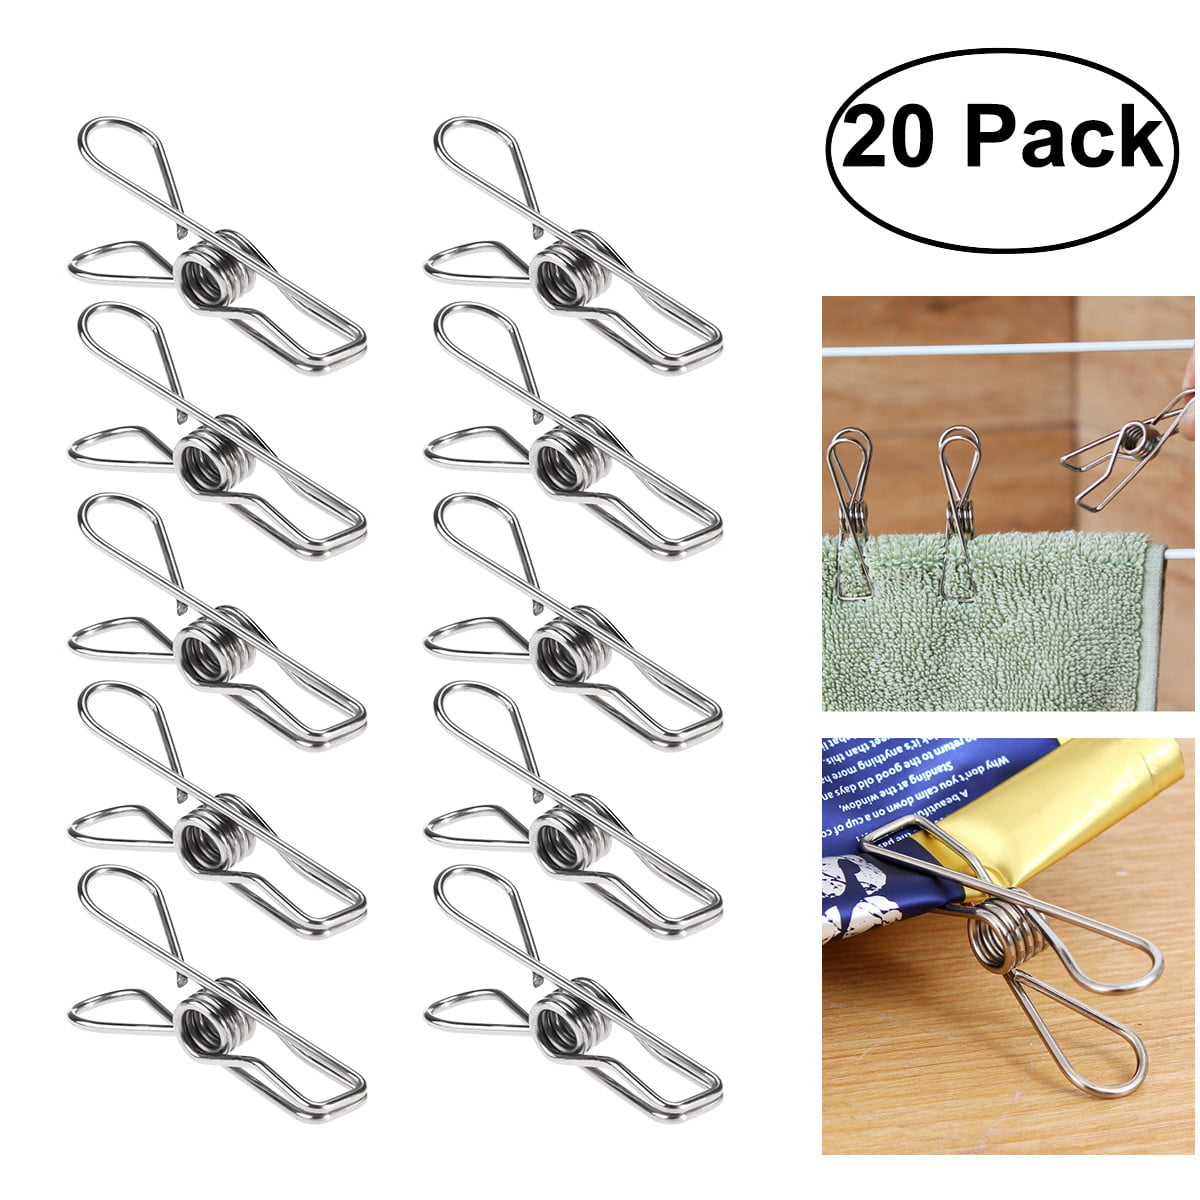 Multipurpose Stainless Steel Clips Clothes Pin Peg Holders Clothing Clips 20pcs 